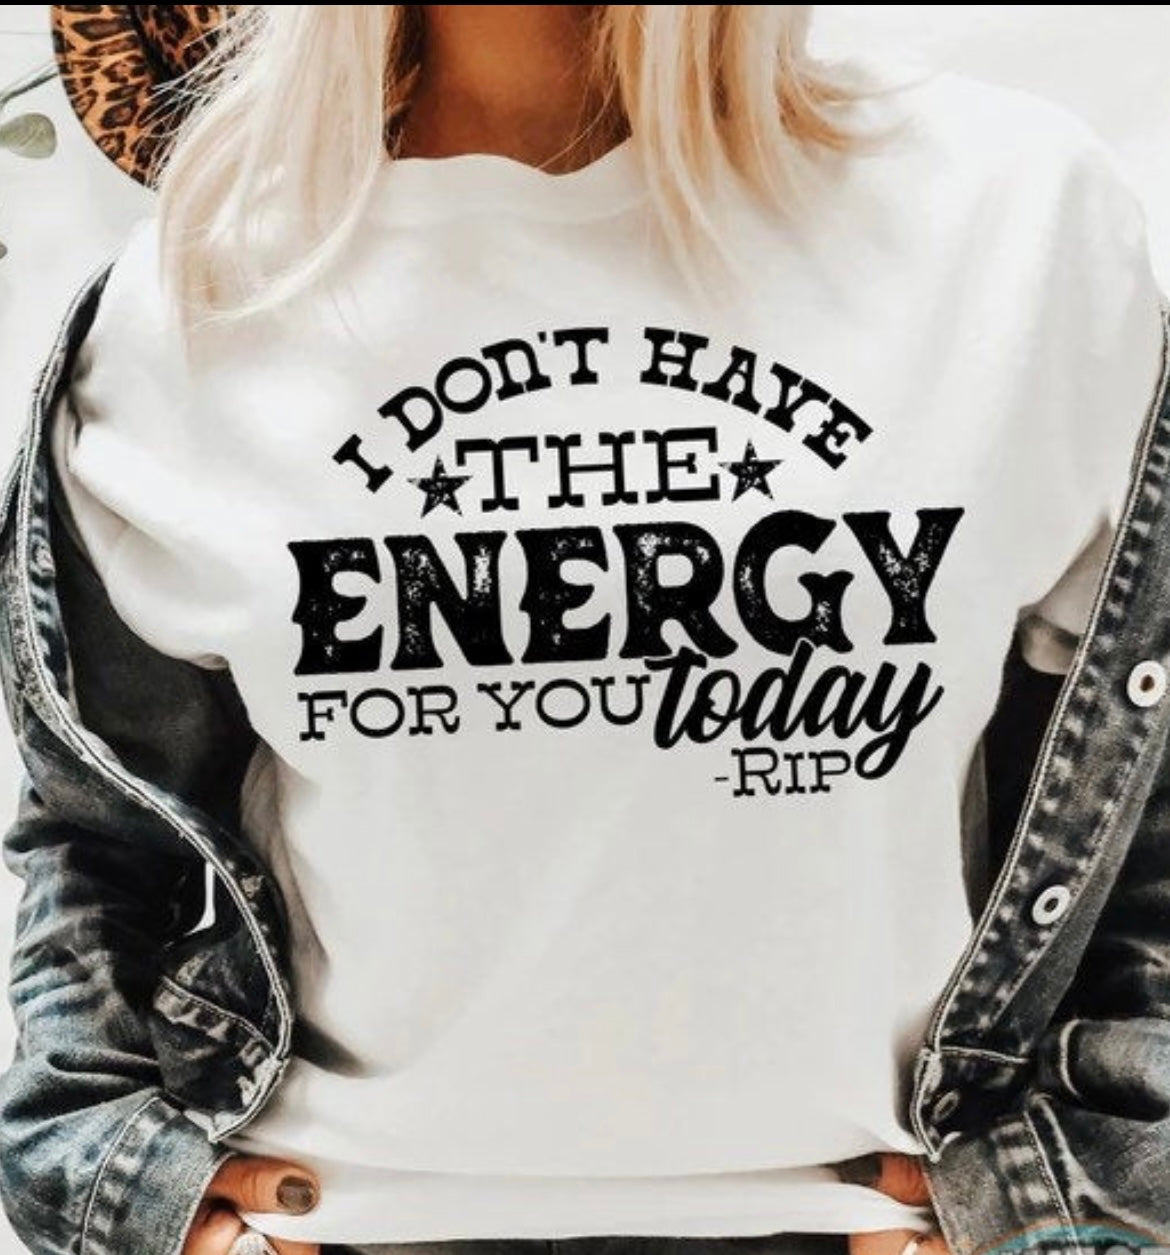 Don't Have the Energy- Rip